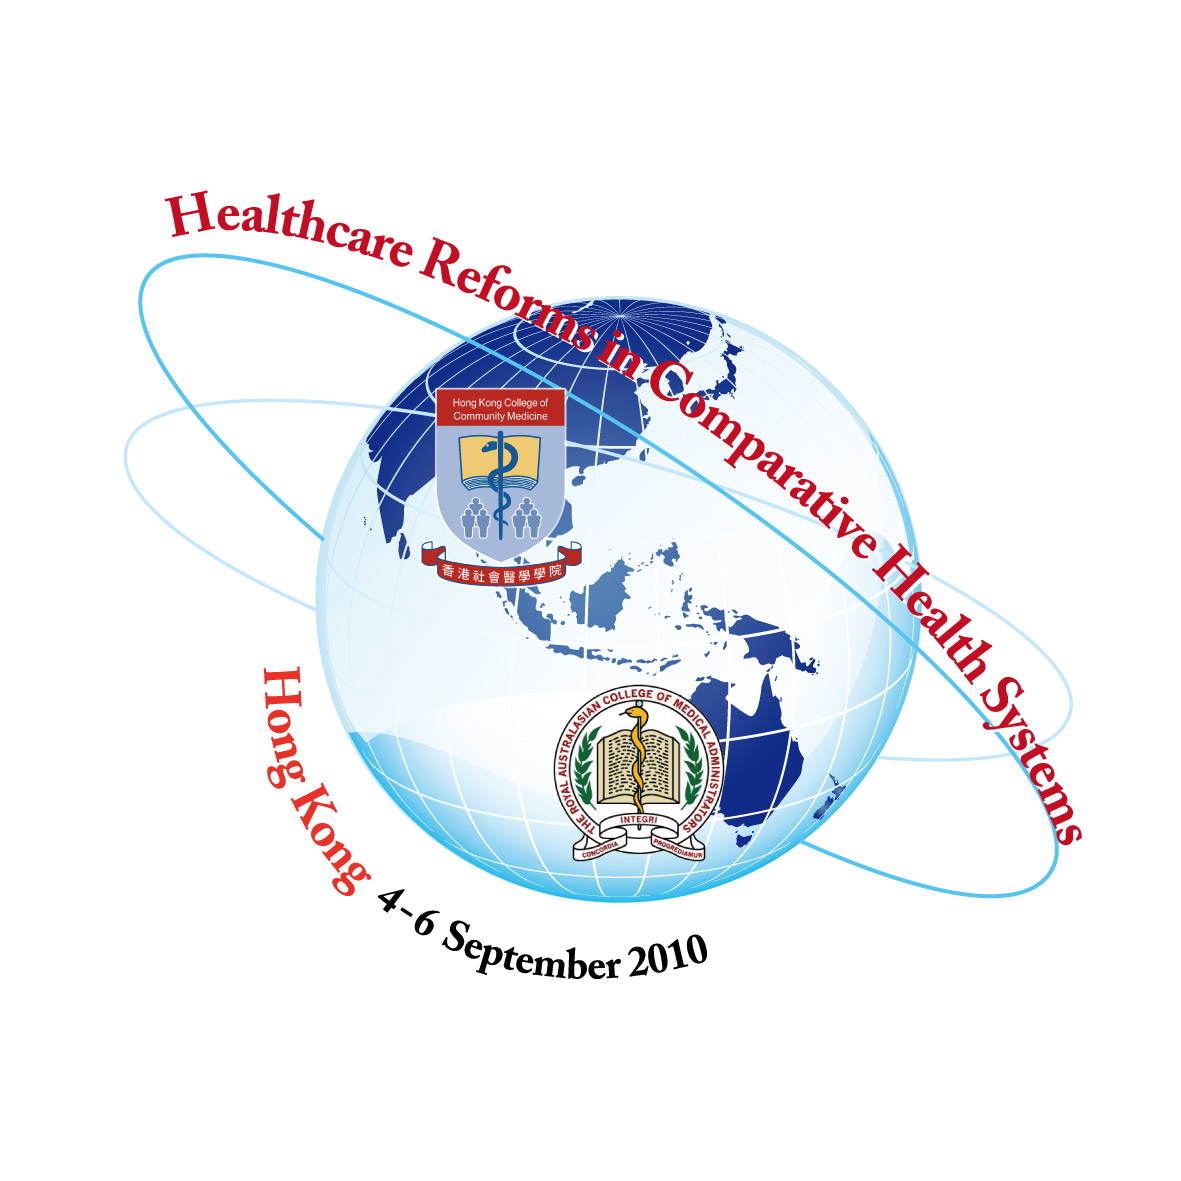 The RACMA-HKCCM International Conference 2010 - Healthcare Reforms in Comparative Health Systems